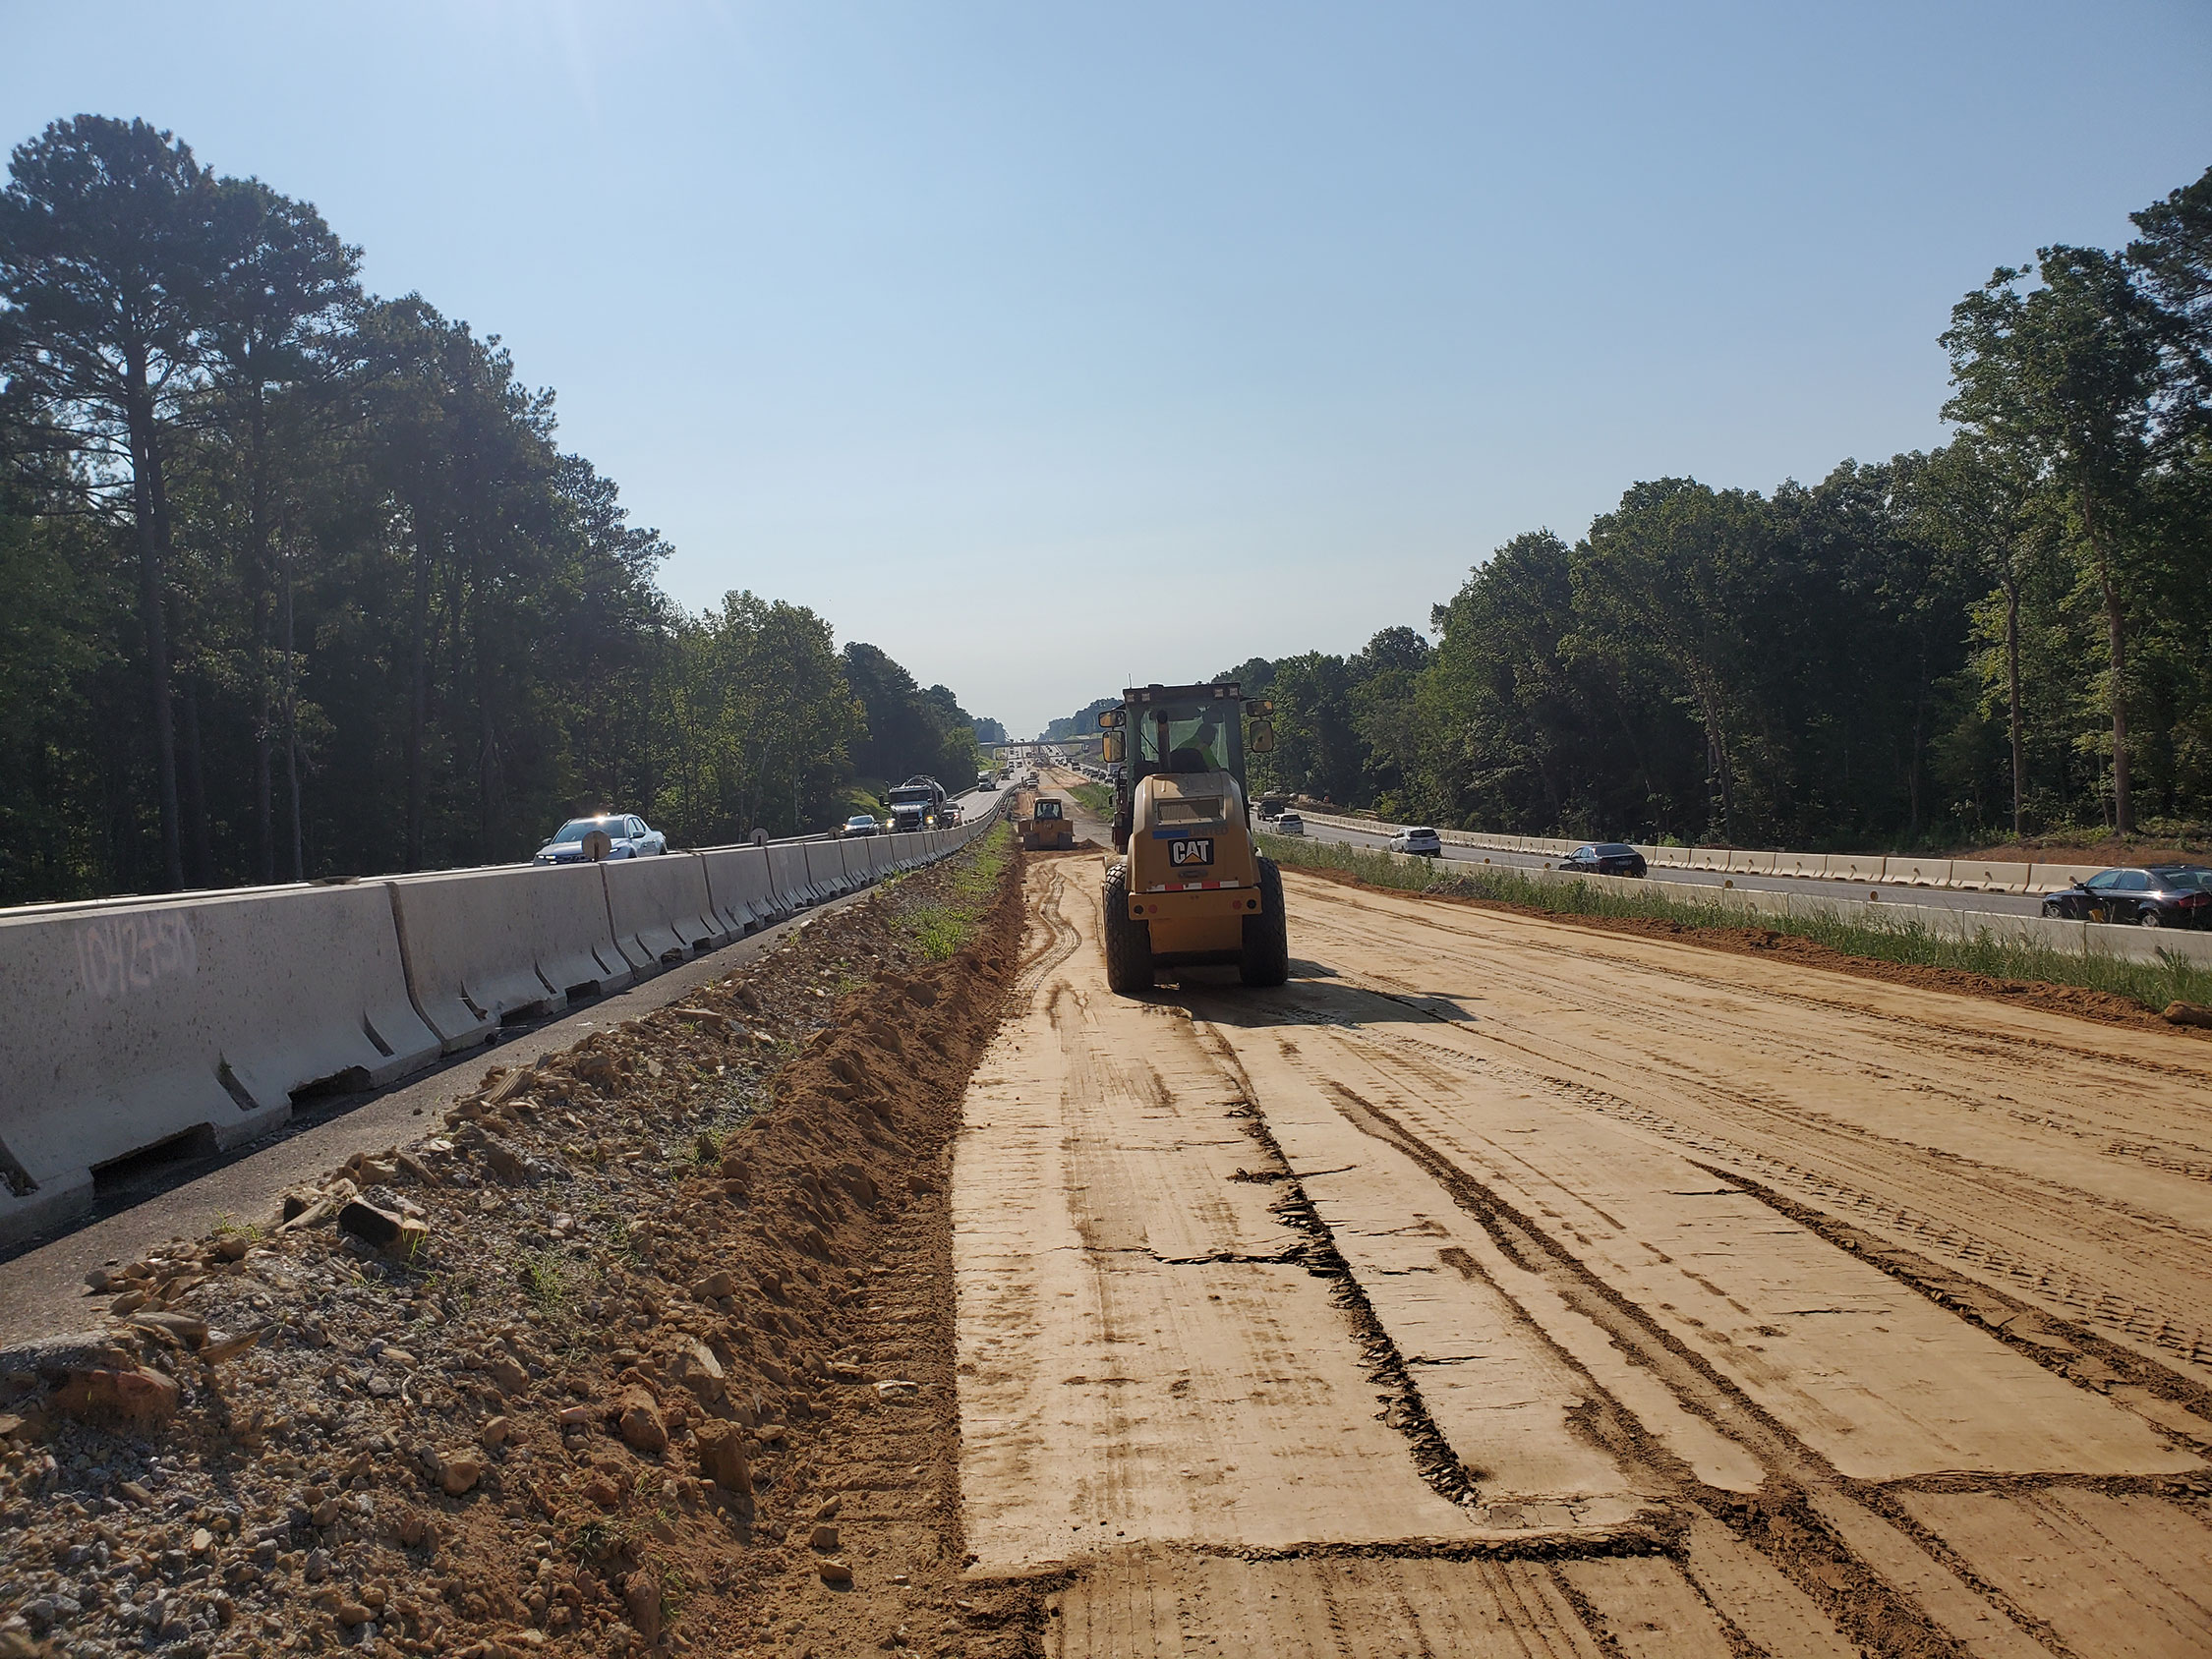 Work is progressing in Segment 2 in the median.  The next phase will be to shift the eastbound traffic onto newly constructed temporary pavement in the median to facilitate construction of the future eastbound lanes.